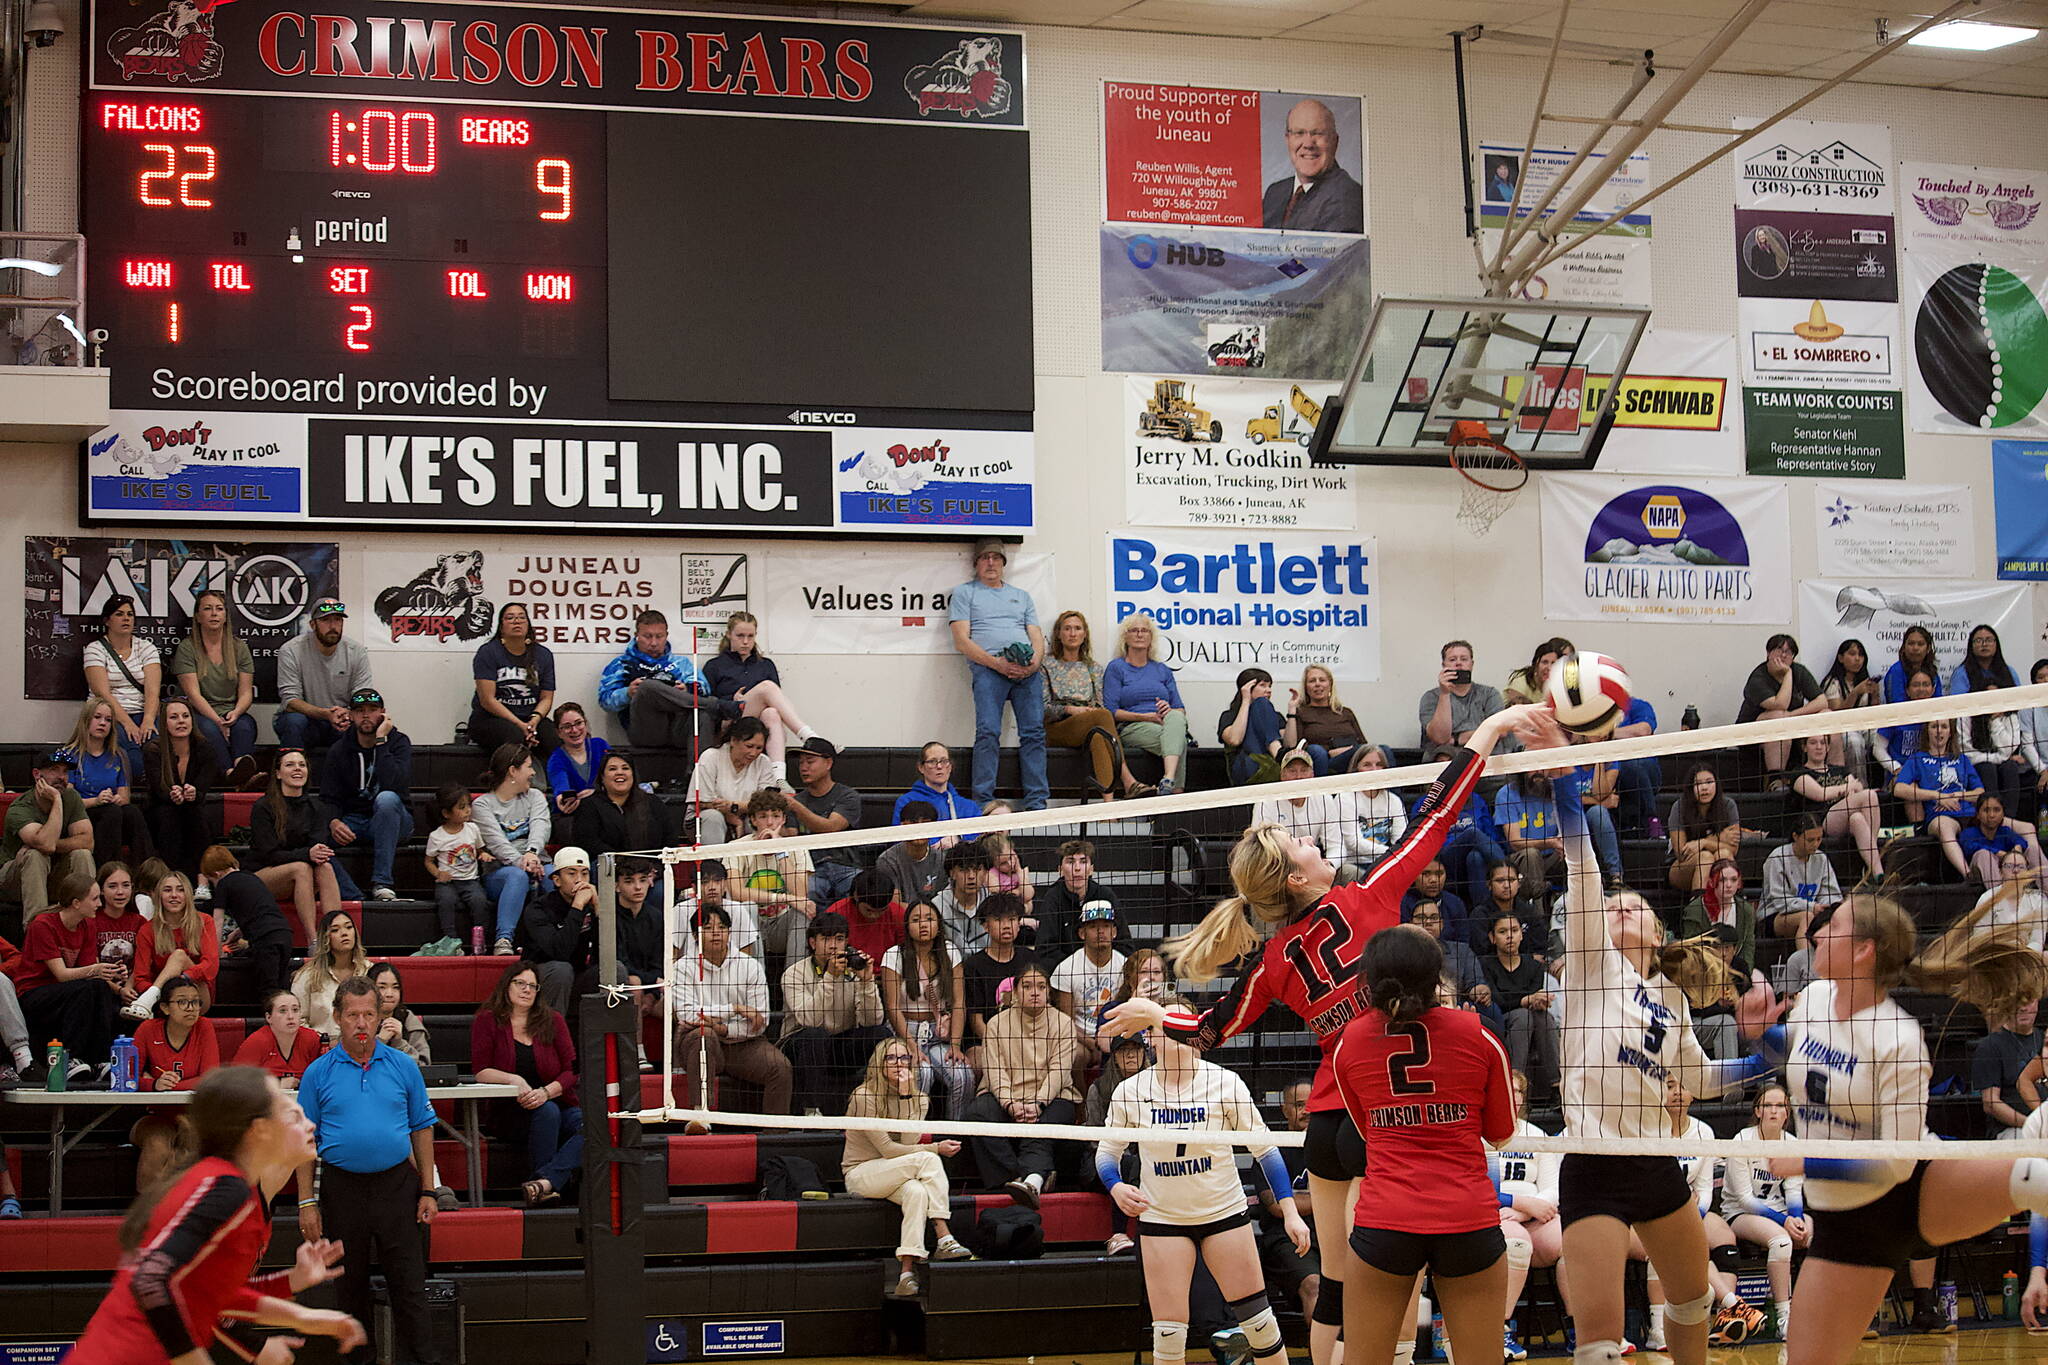 Evelyn Richards (12) spikes the ball to score a point Juneau-Douglas High School: Yadaa.at Kalé near the end of the team’s second game against Thunder Mountain High School on Saturday at JDHS. THMS won the game by a score of 25-10. (Mark Sabbatini / Juneau Empire)